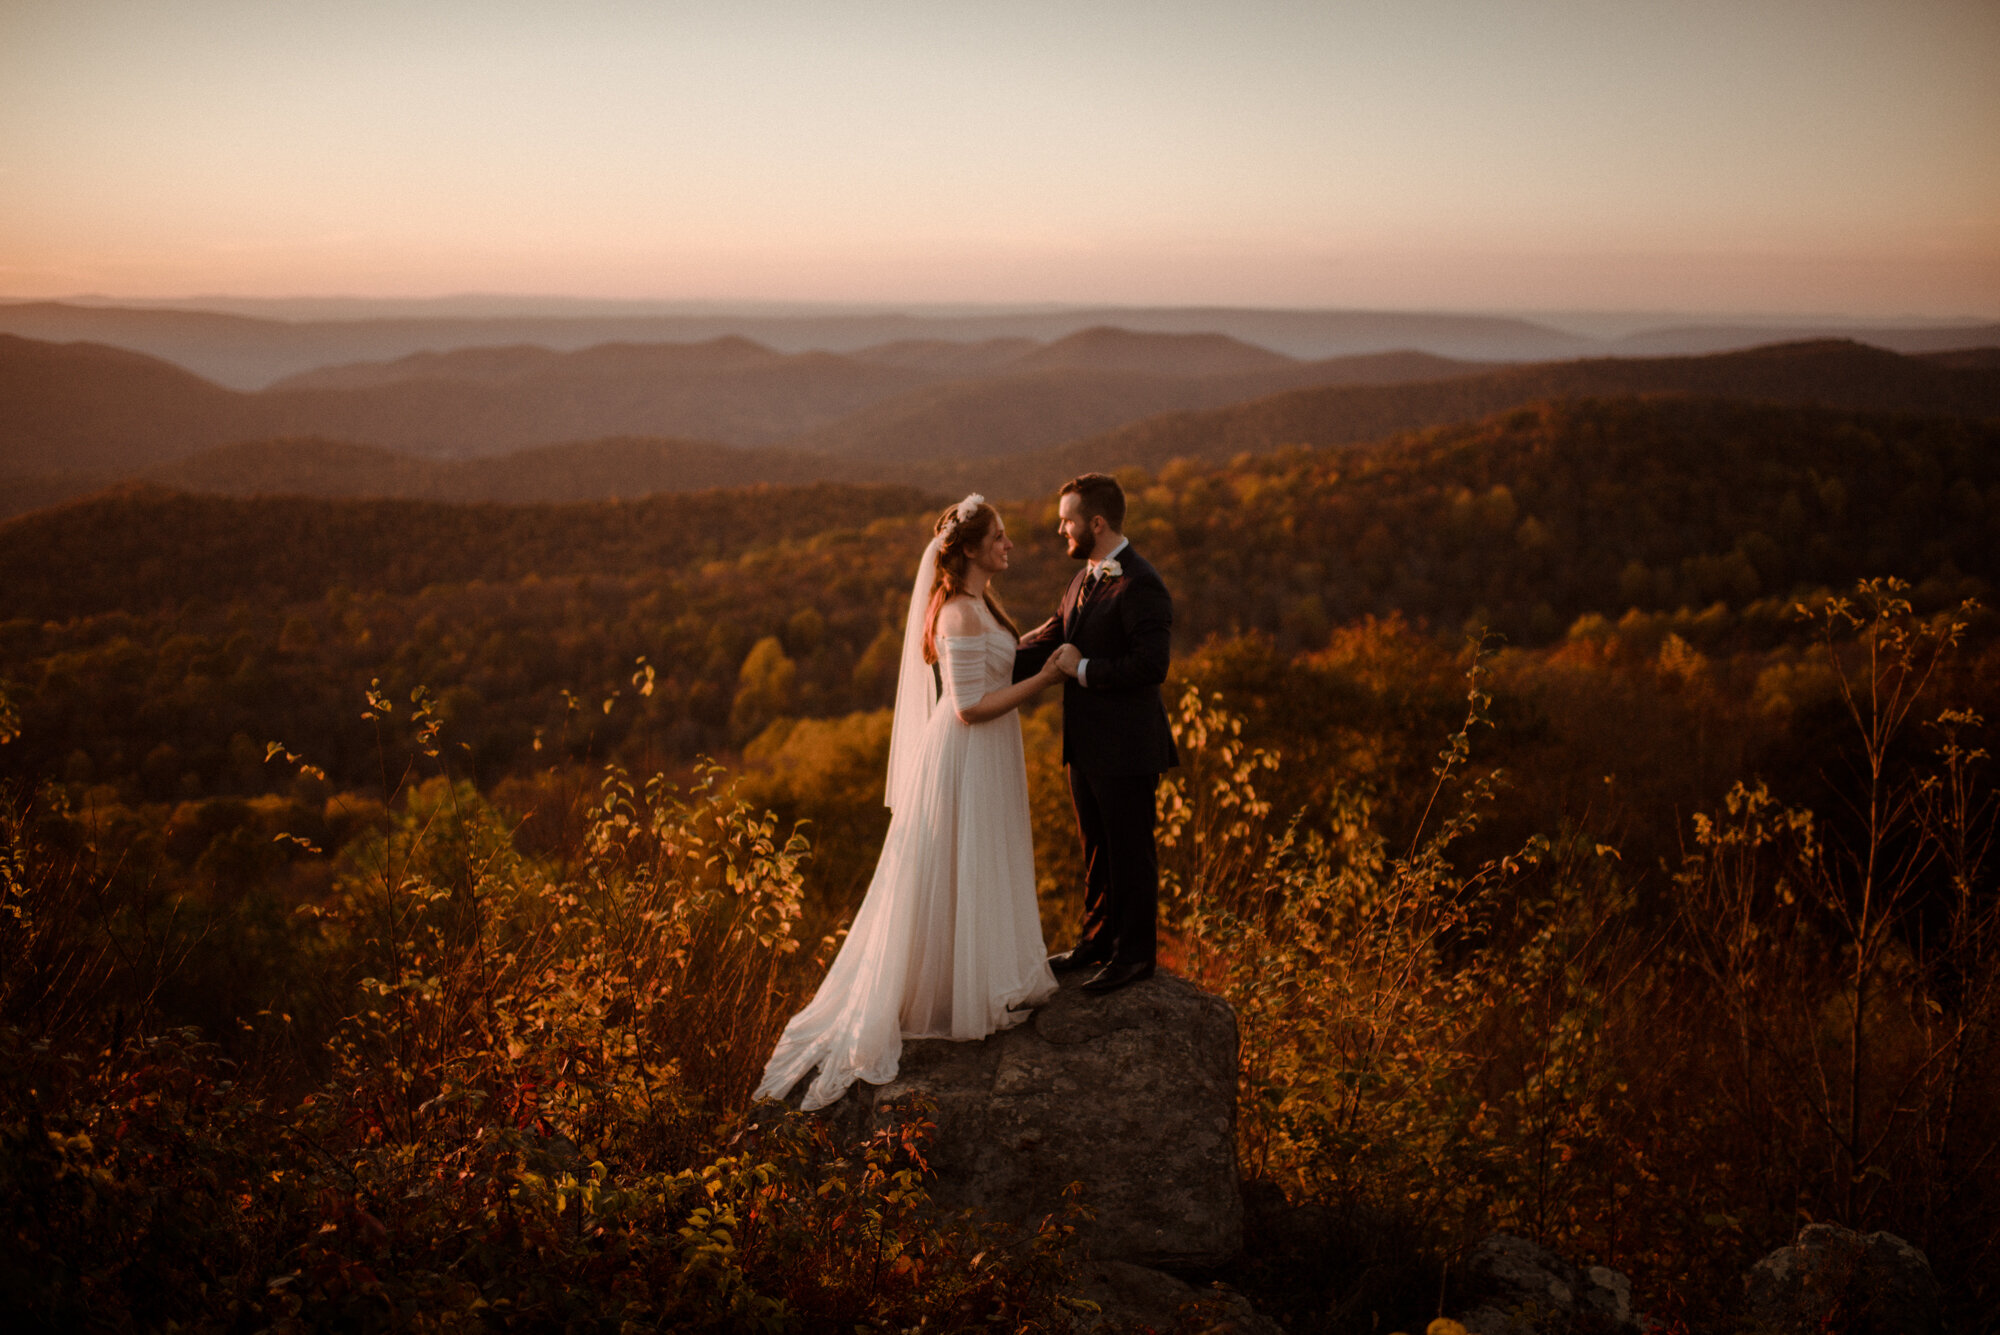 Emily and Ryan - Mountain Top Elopement - Shenandoah National Park - Blue Ridge Mountains Couple Photo Shoot in the Fall - White Sails Creative_67.jpg